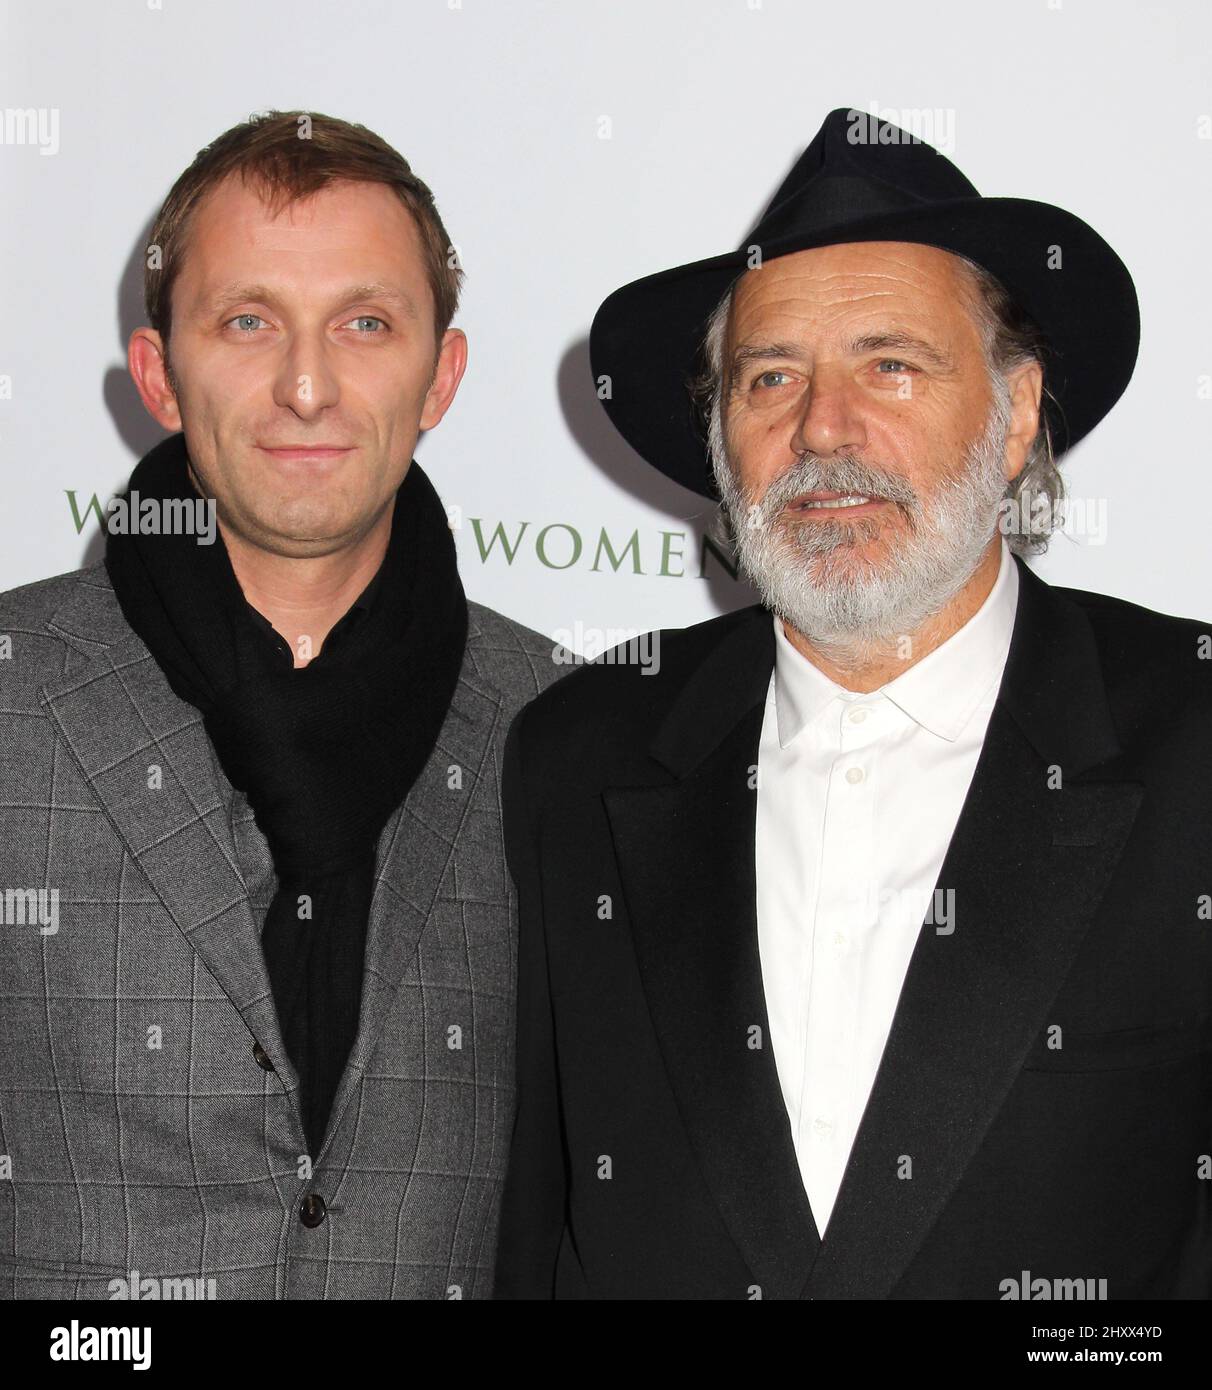 Goran Kostic and Rade Serbedzija during the premiere of 'In the Land of Blood and Honey' at The School of Visual Arts Theater in New York City. Stock Photo